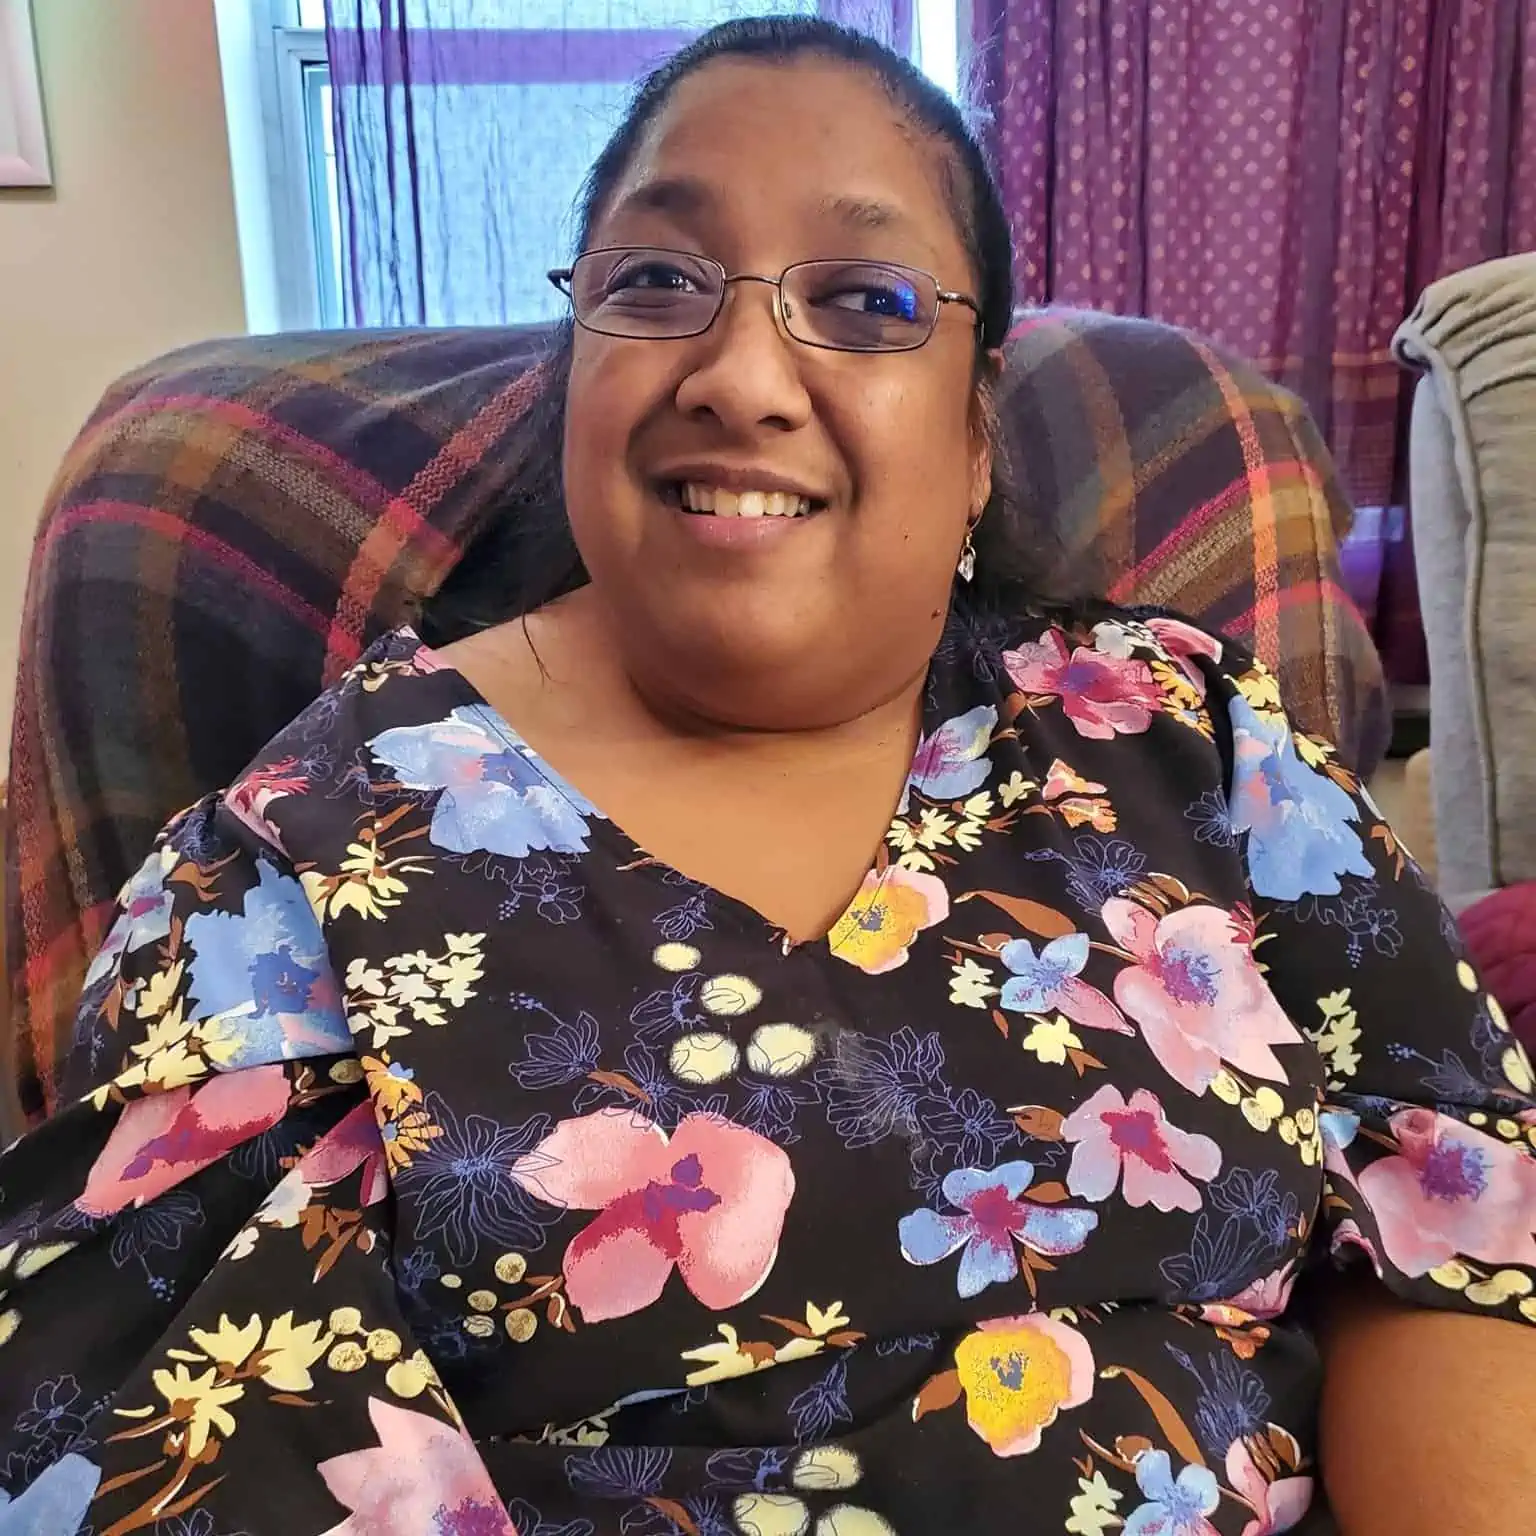 Sarah is a dark-skinned woman sitting in her living room recliner. Visible on the back of the recliner is a gray shawl with a bright plaid pattern. A window is behind her, with long dark purple curtains to the right. She is wearing black wire-rimmed glasses that have a purple tint. Sarah also is wearing small silver earrings that shimmer as well as a shirt that has a floral pattern over a navy blue background. The flowers are light blue, purple and yellow. She’s smiling widely, and her eyes are actually open, which is one reason she chose this photo.